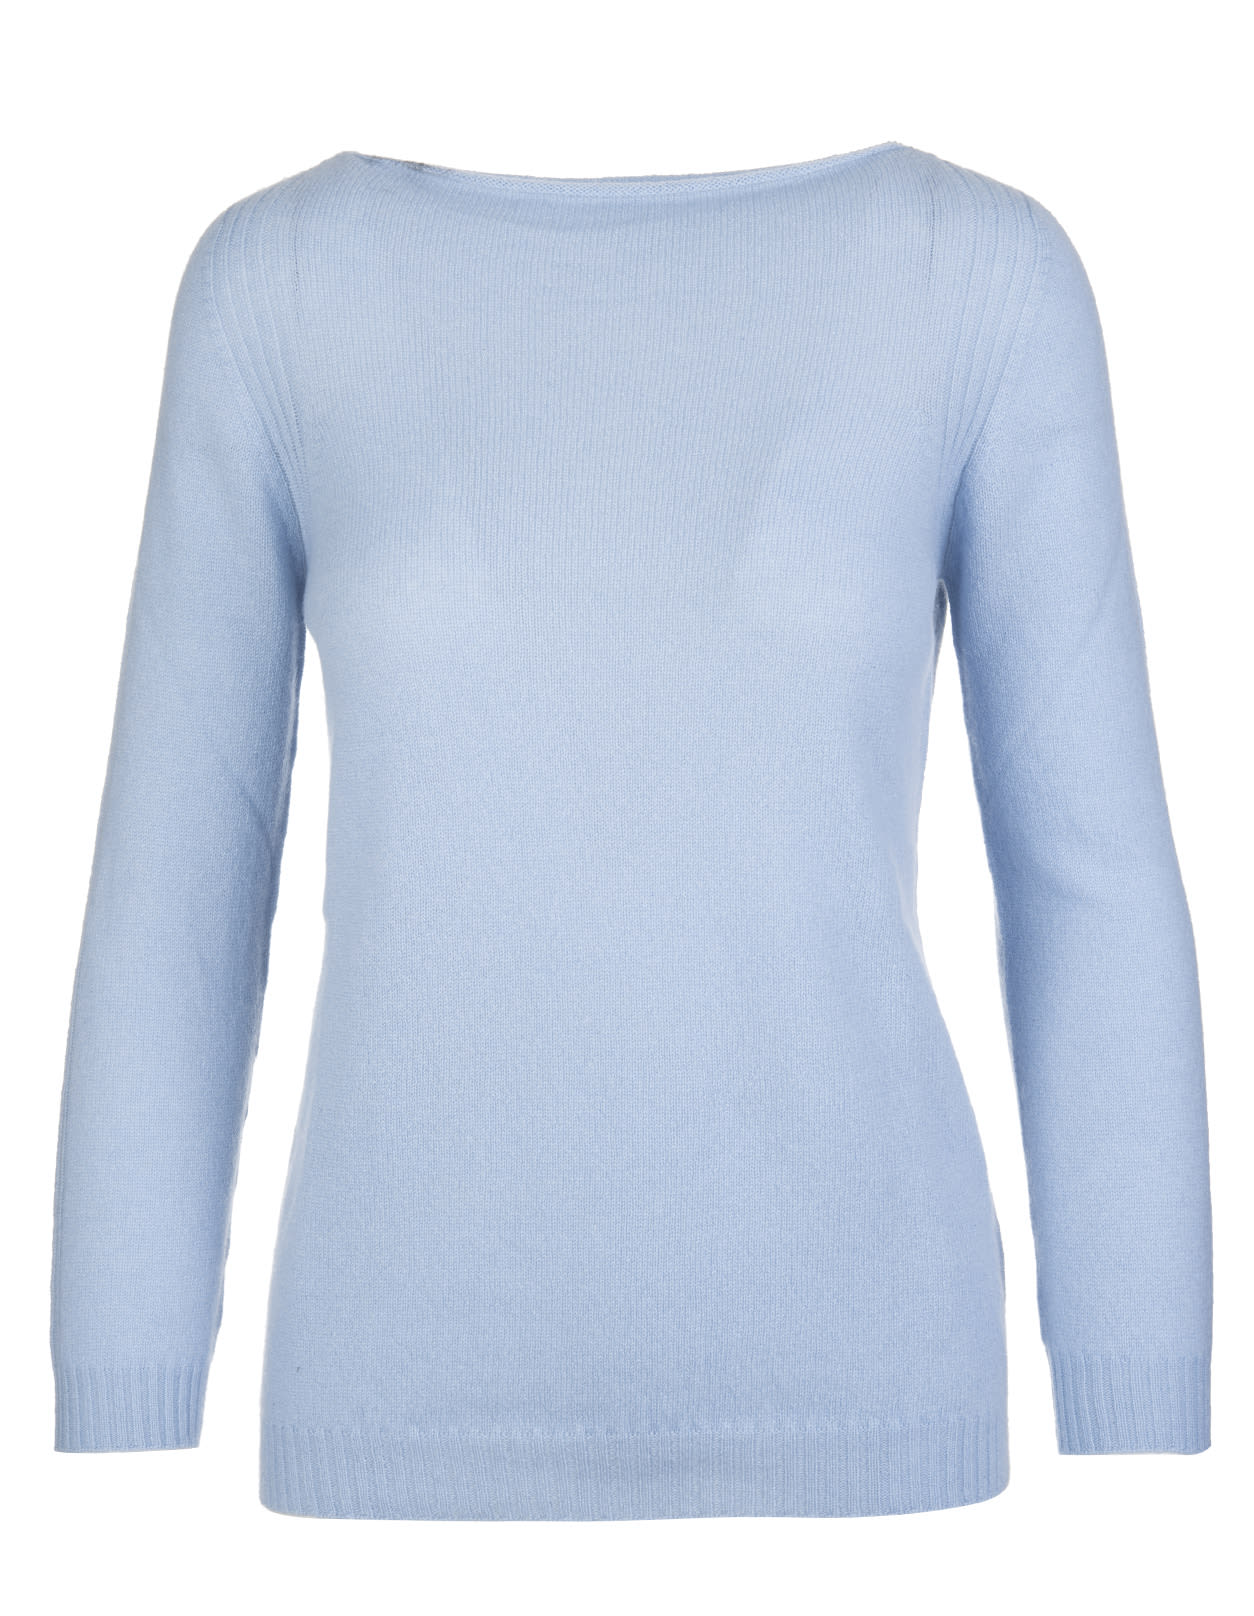 Fedeli Woman Azure Cashmere Pullover With Boat Neck